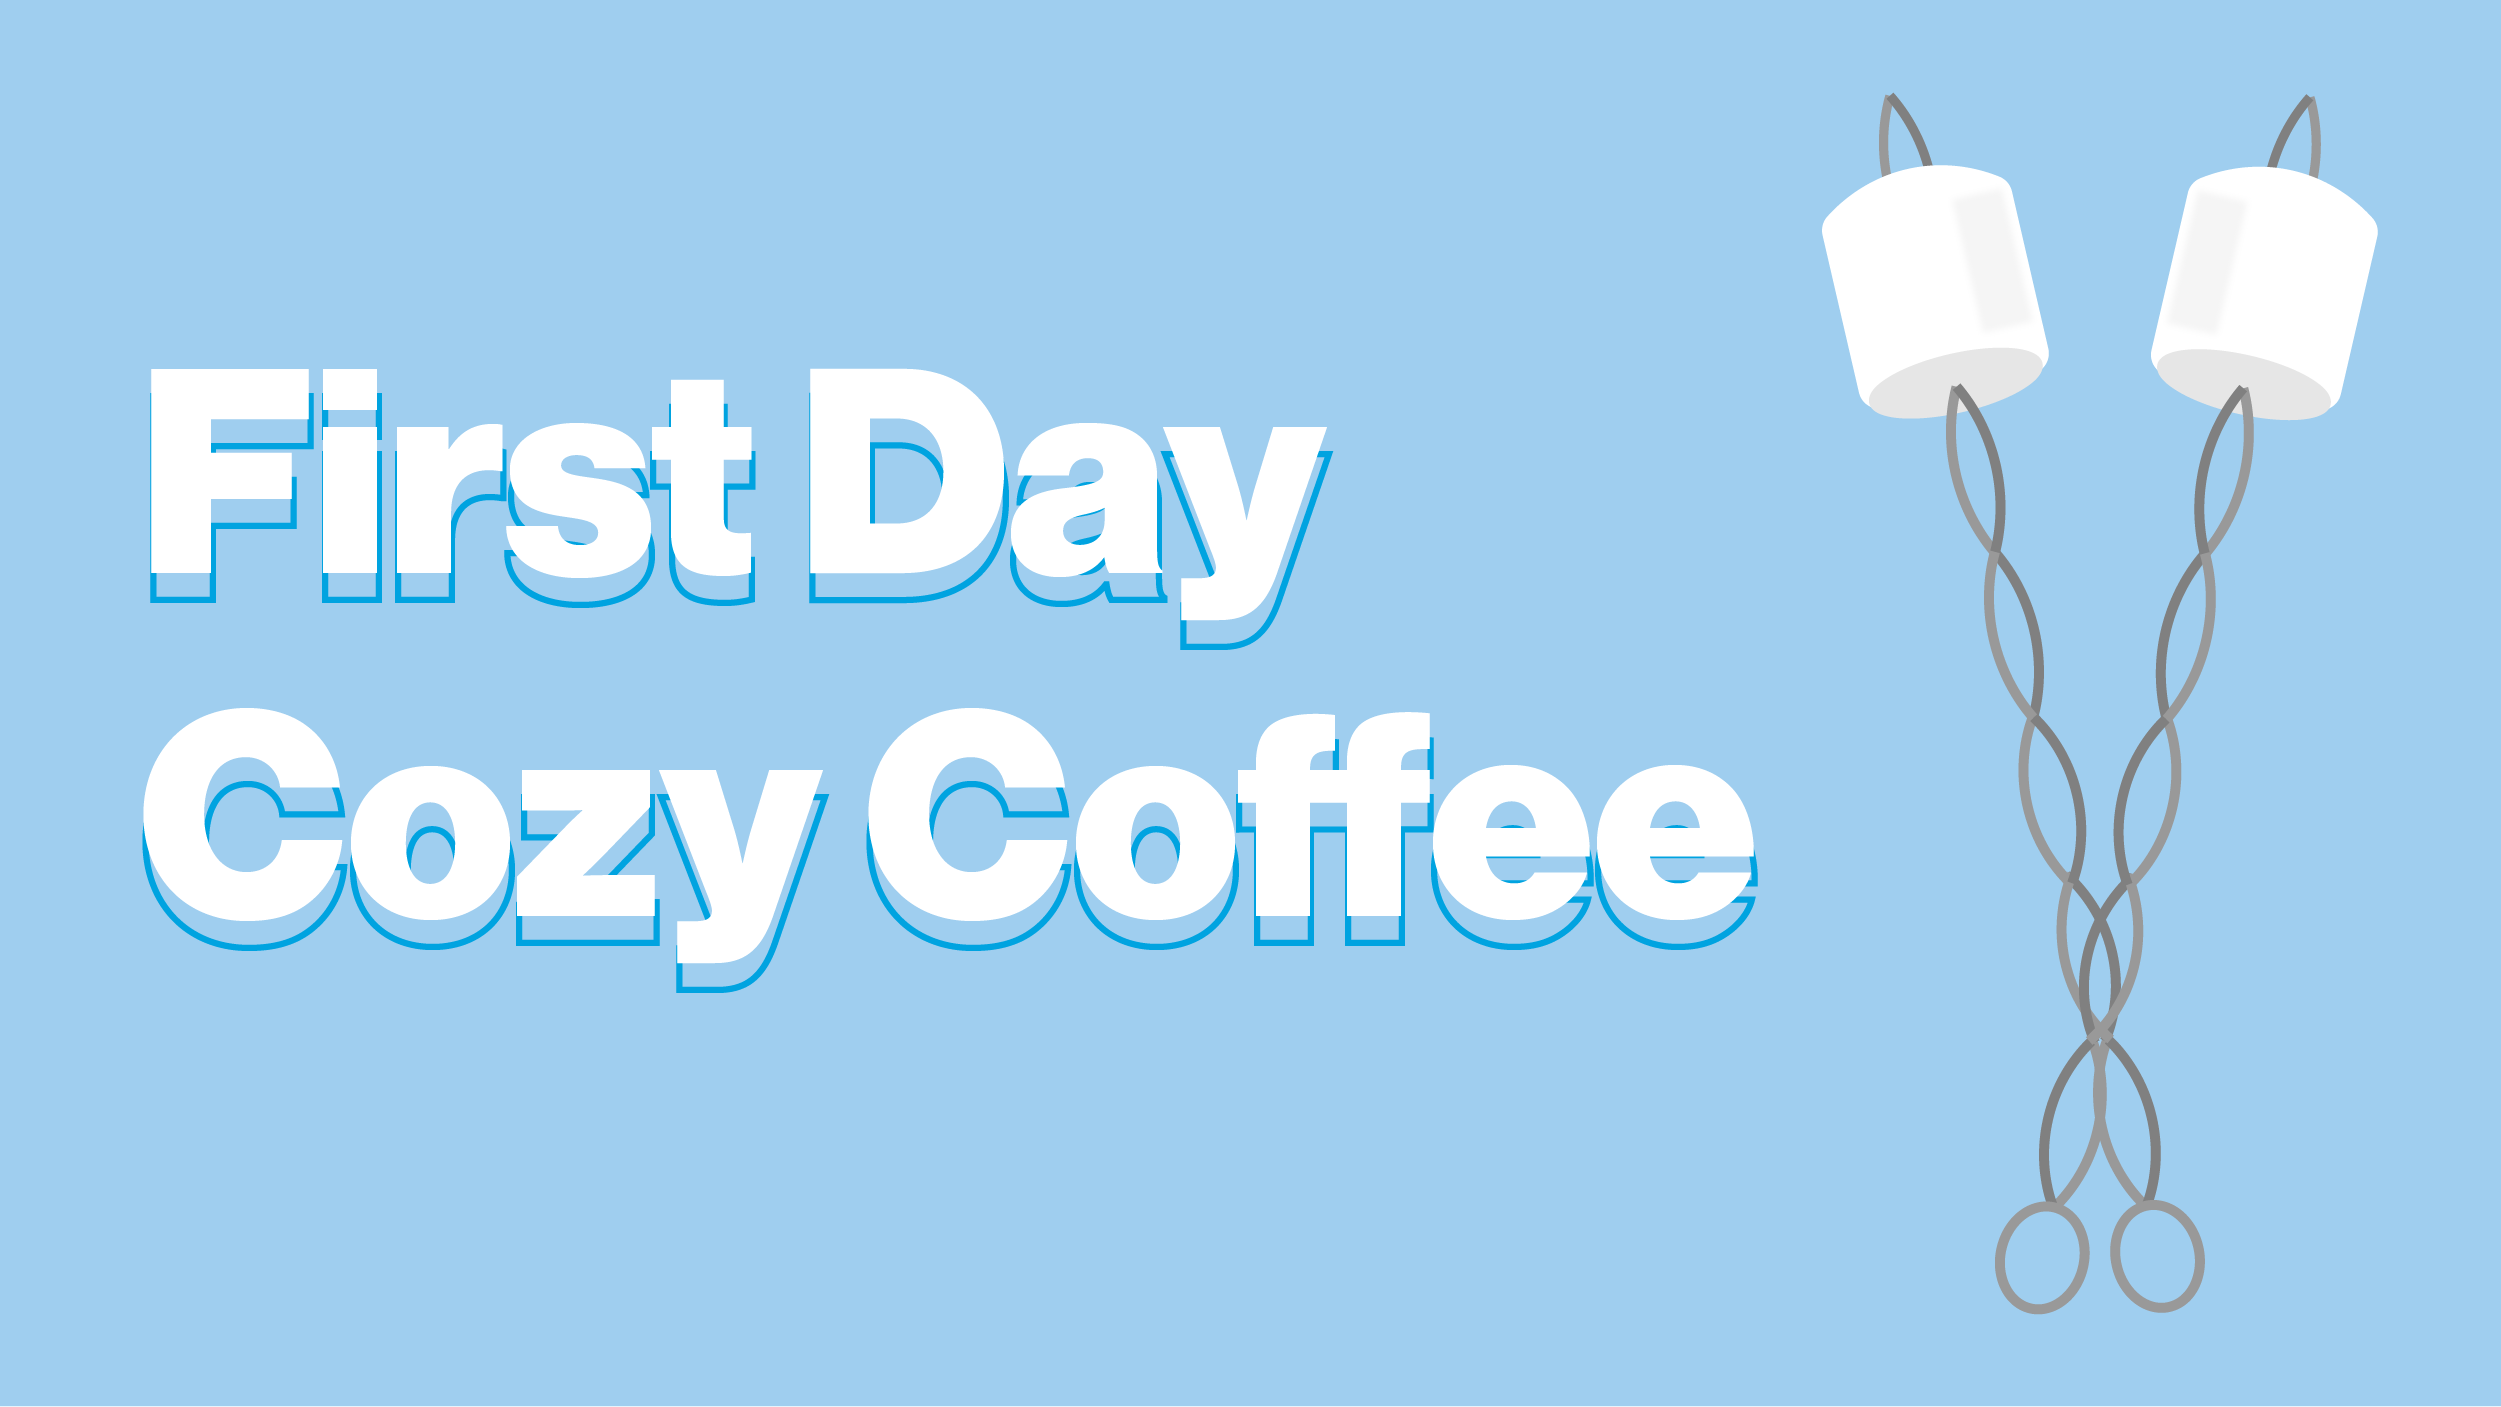 First Day Cozy Coffee